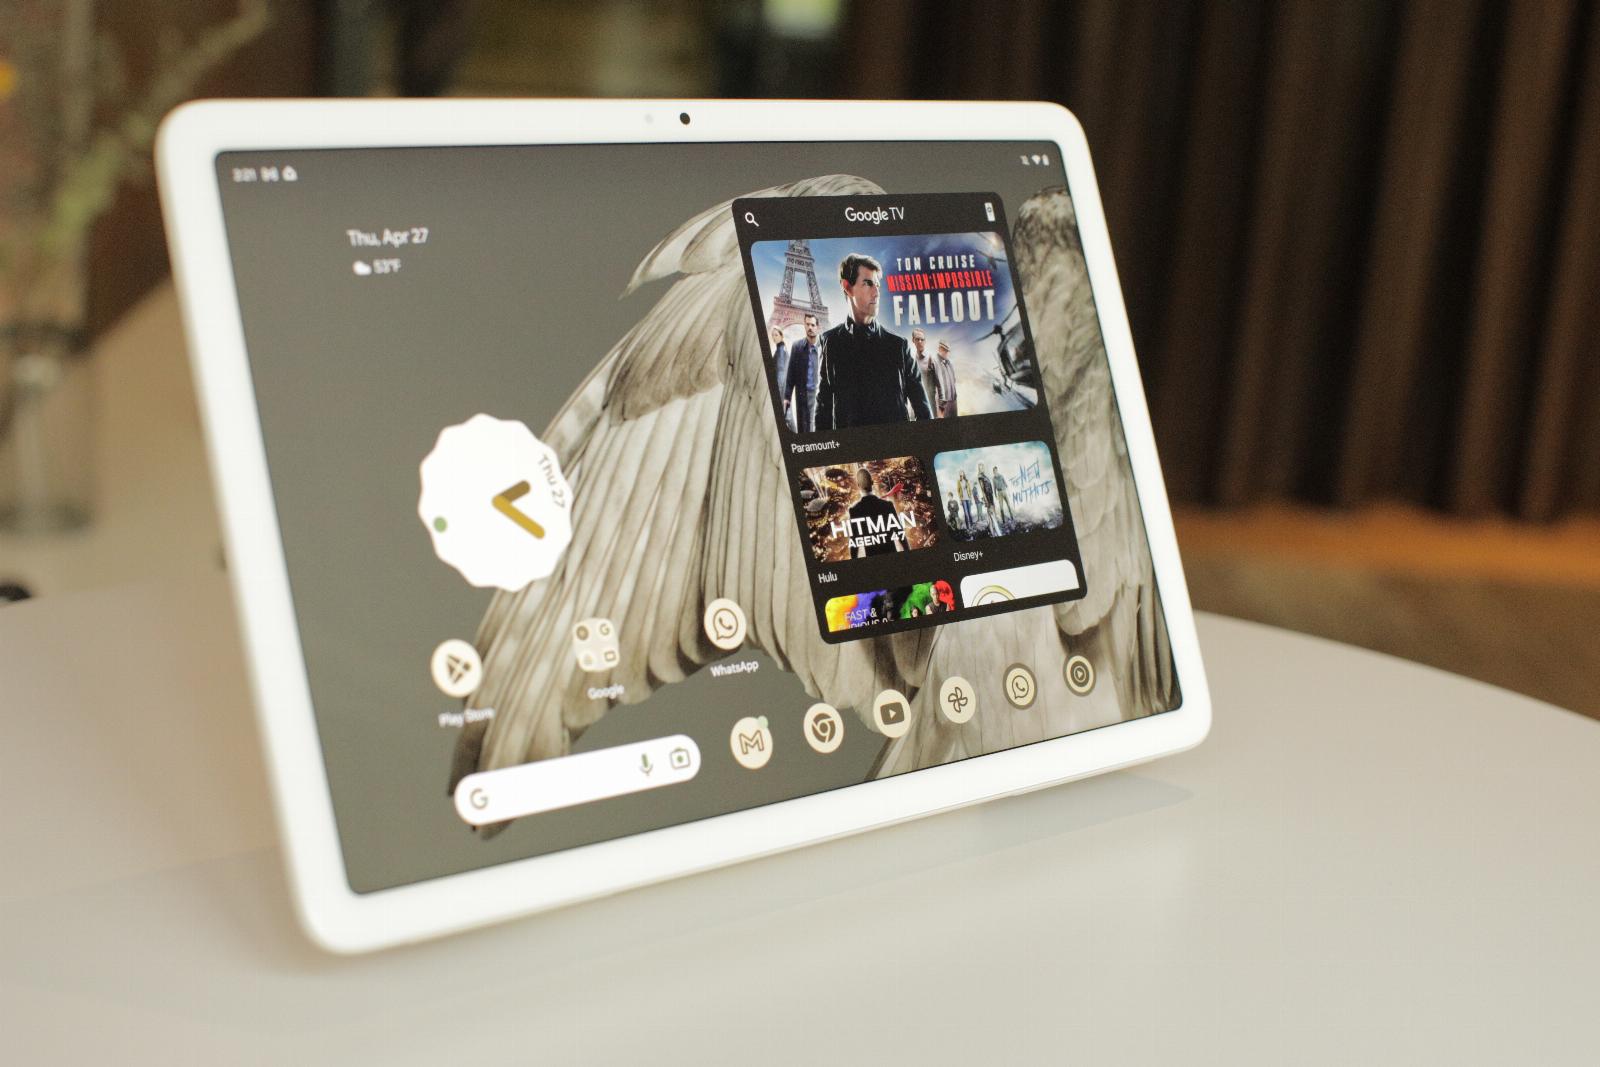 Google’s Pixel Tablet ships with its own speaker dock